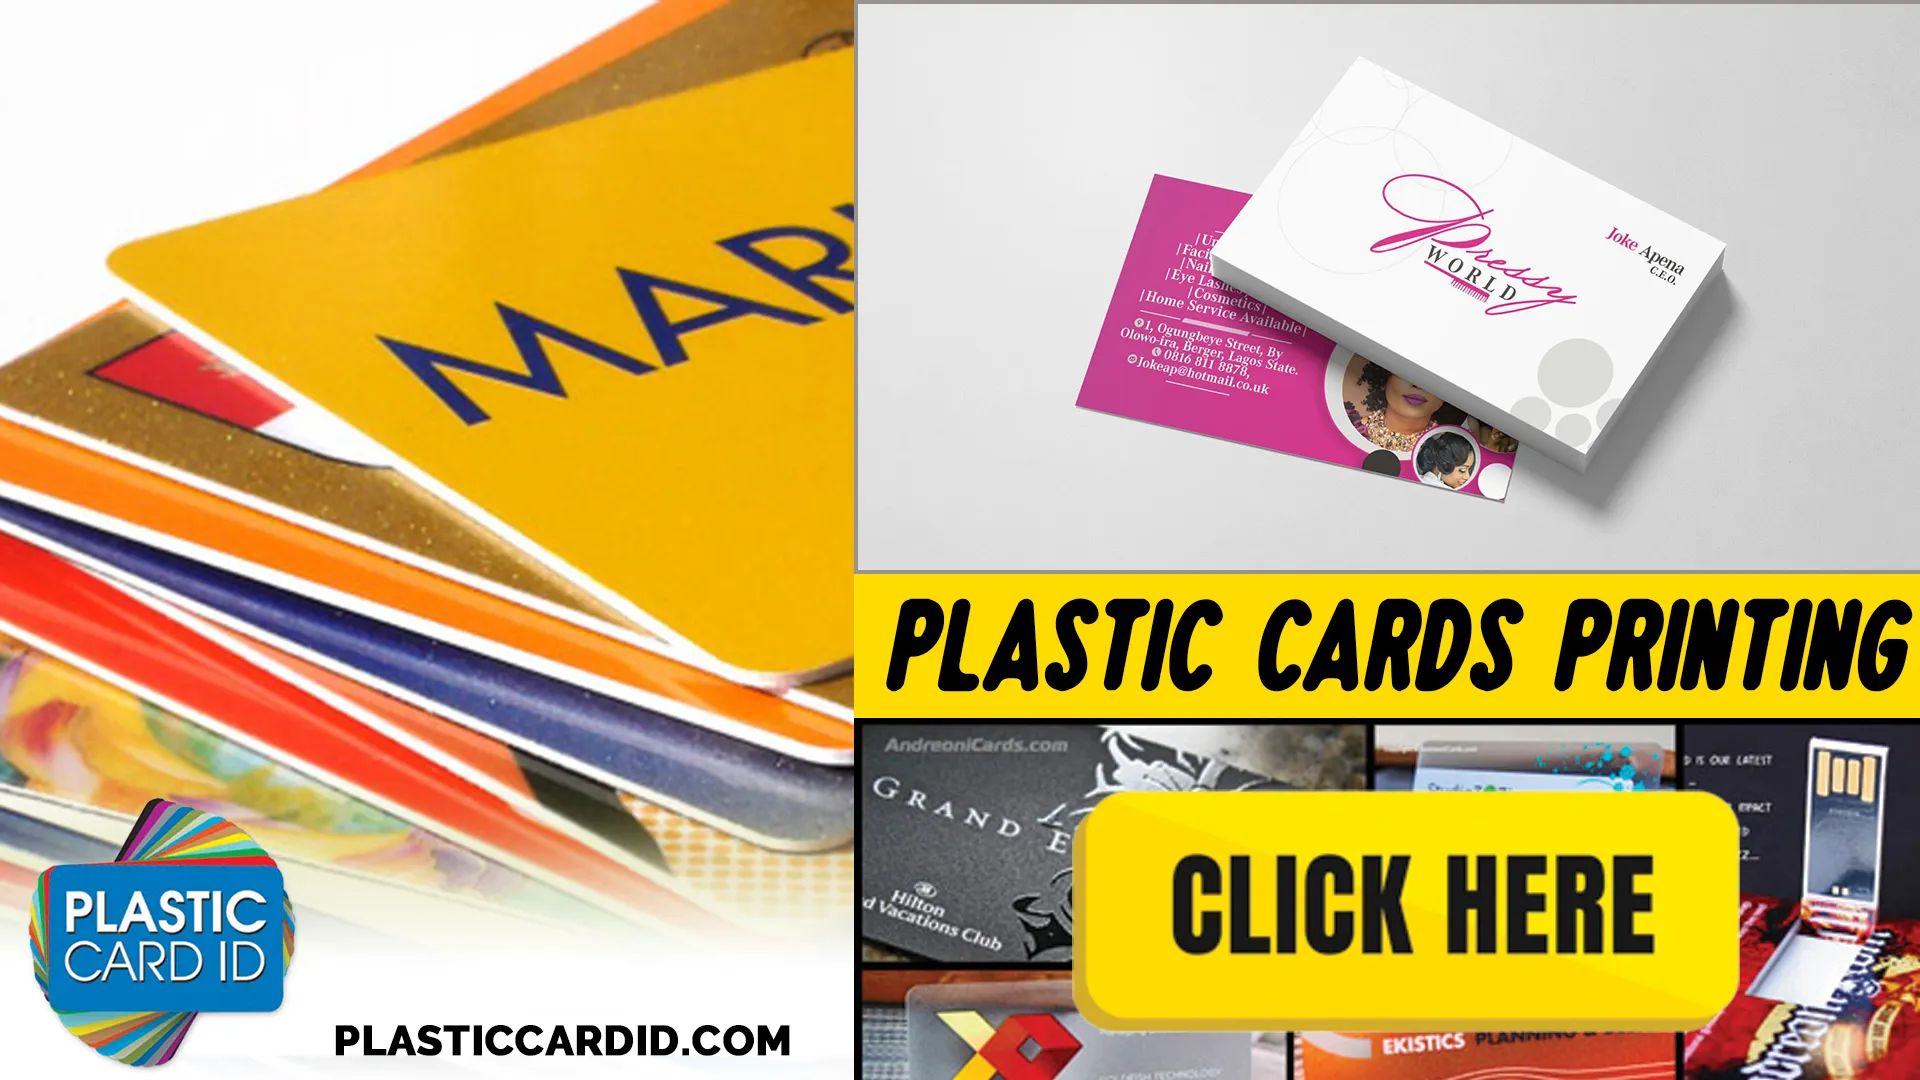 Welcome to the World of Innovative Branding with Plastic Cards